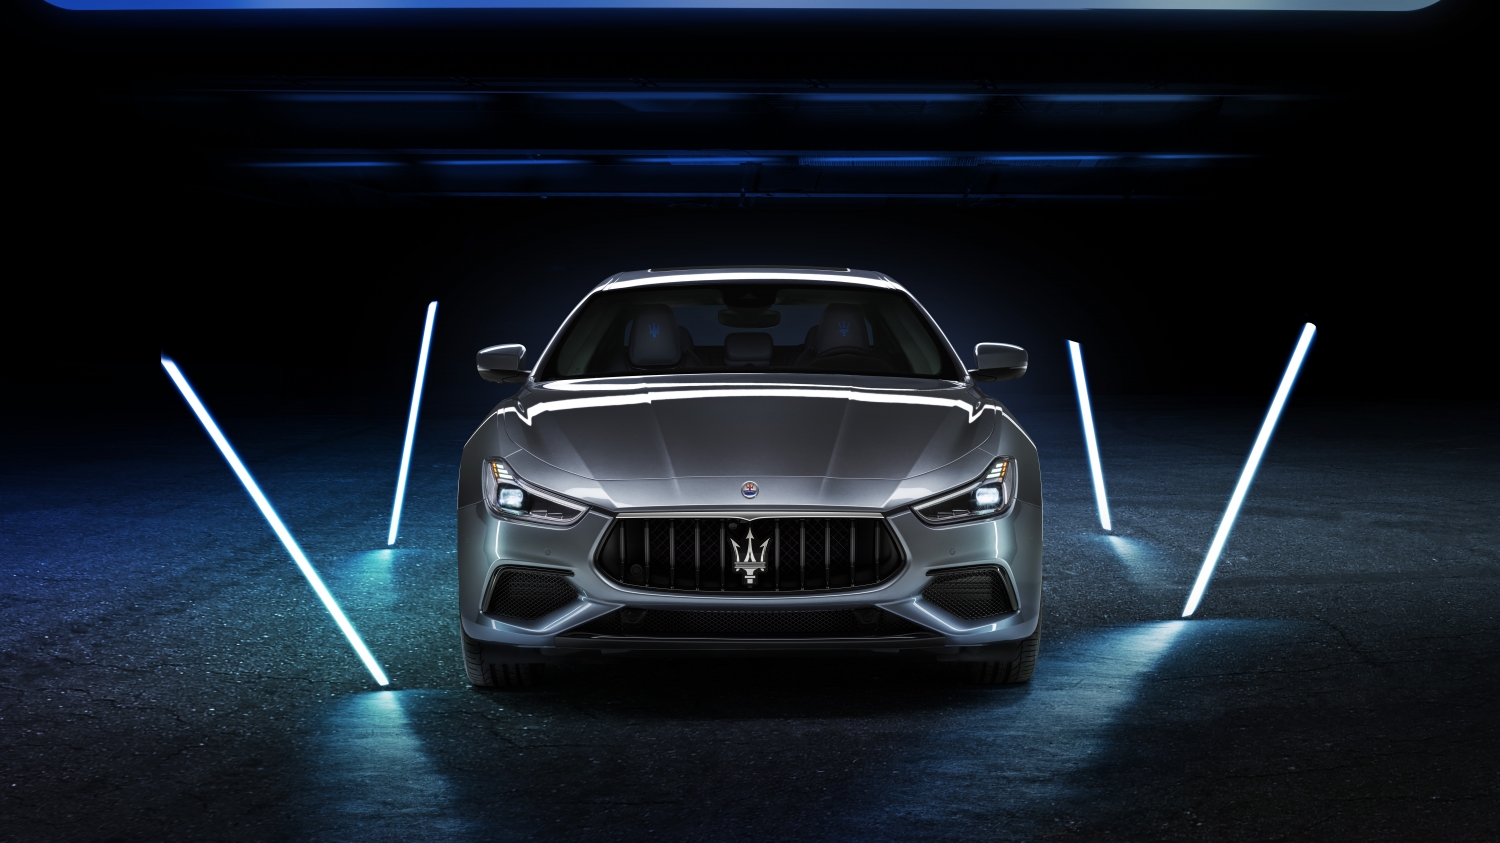 Image for New Ghibli Hybrid: The First Electrified Vehicle In Maserati’s History